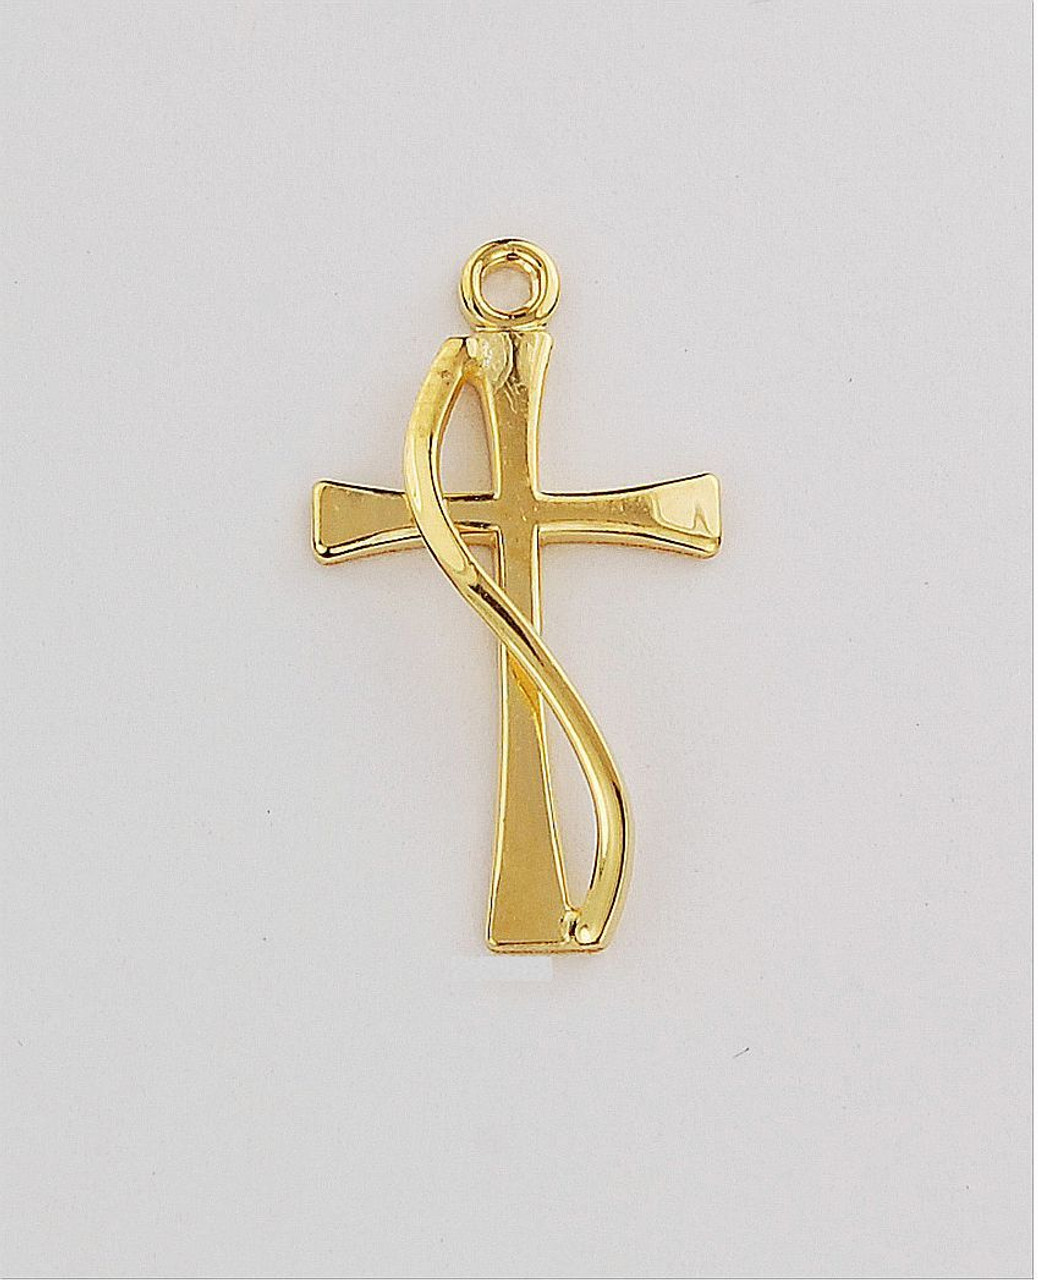 https://cdn11.bigcommerce.com/s-r75dscg/images/stencil/1280x1280/products/20166/39974/sterling-silver-cross-with-accent-draped-line-in-silver-or-gold-plate-finish-comes-with-18-inch-chain-maj919__09789.1545253186.jpg?c=2